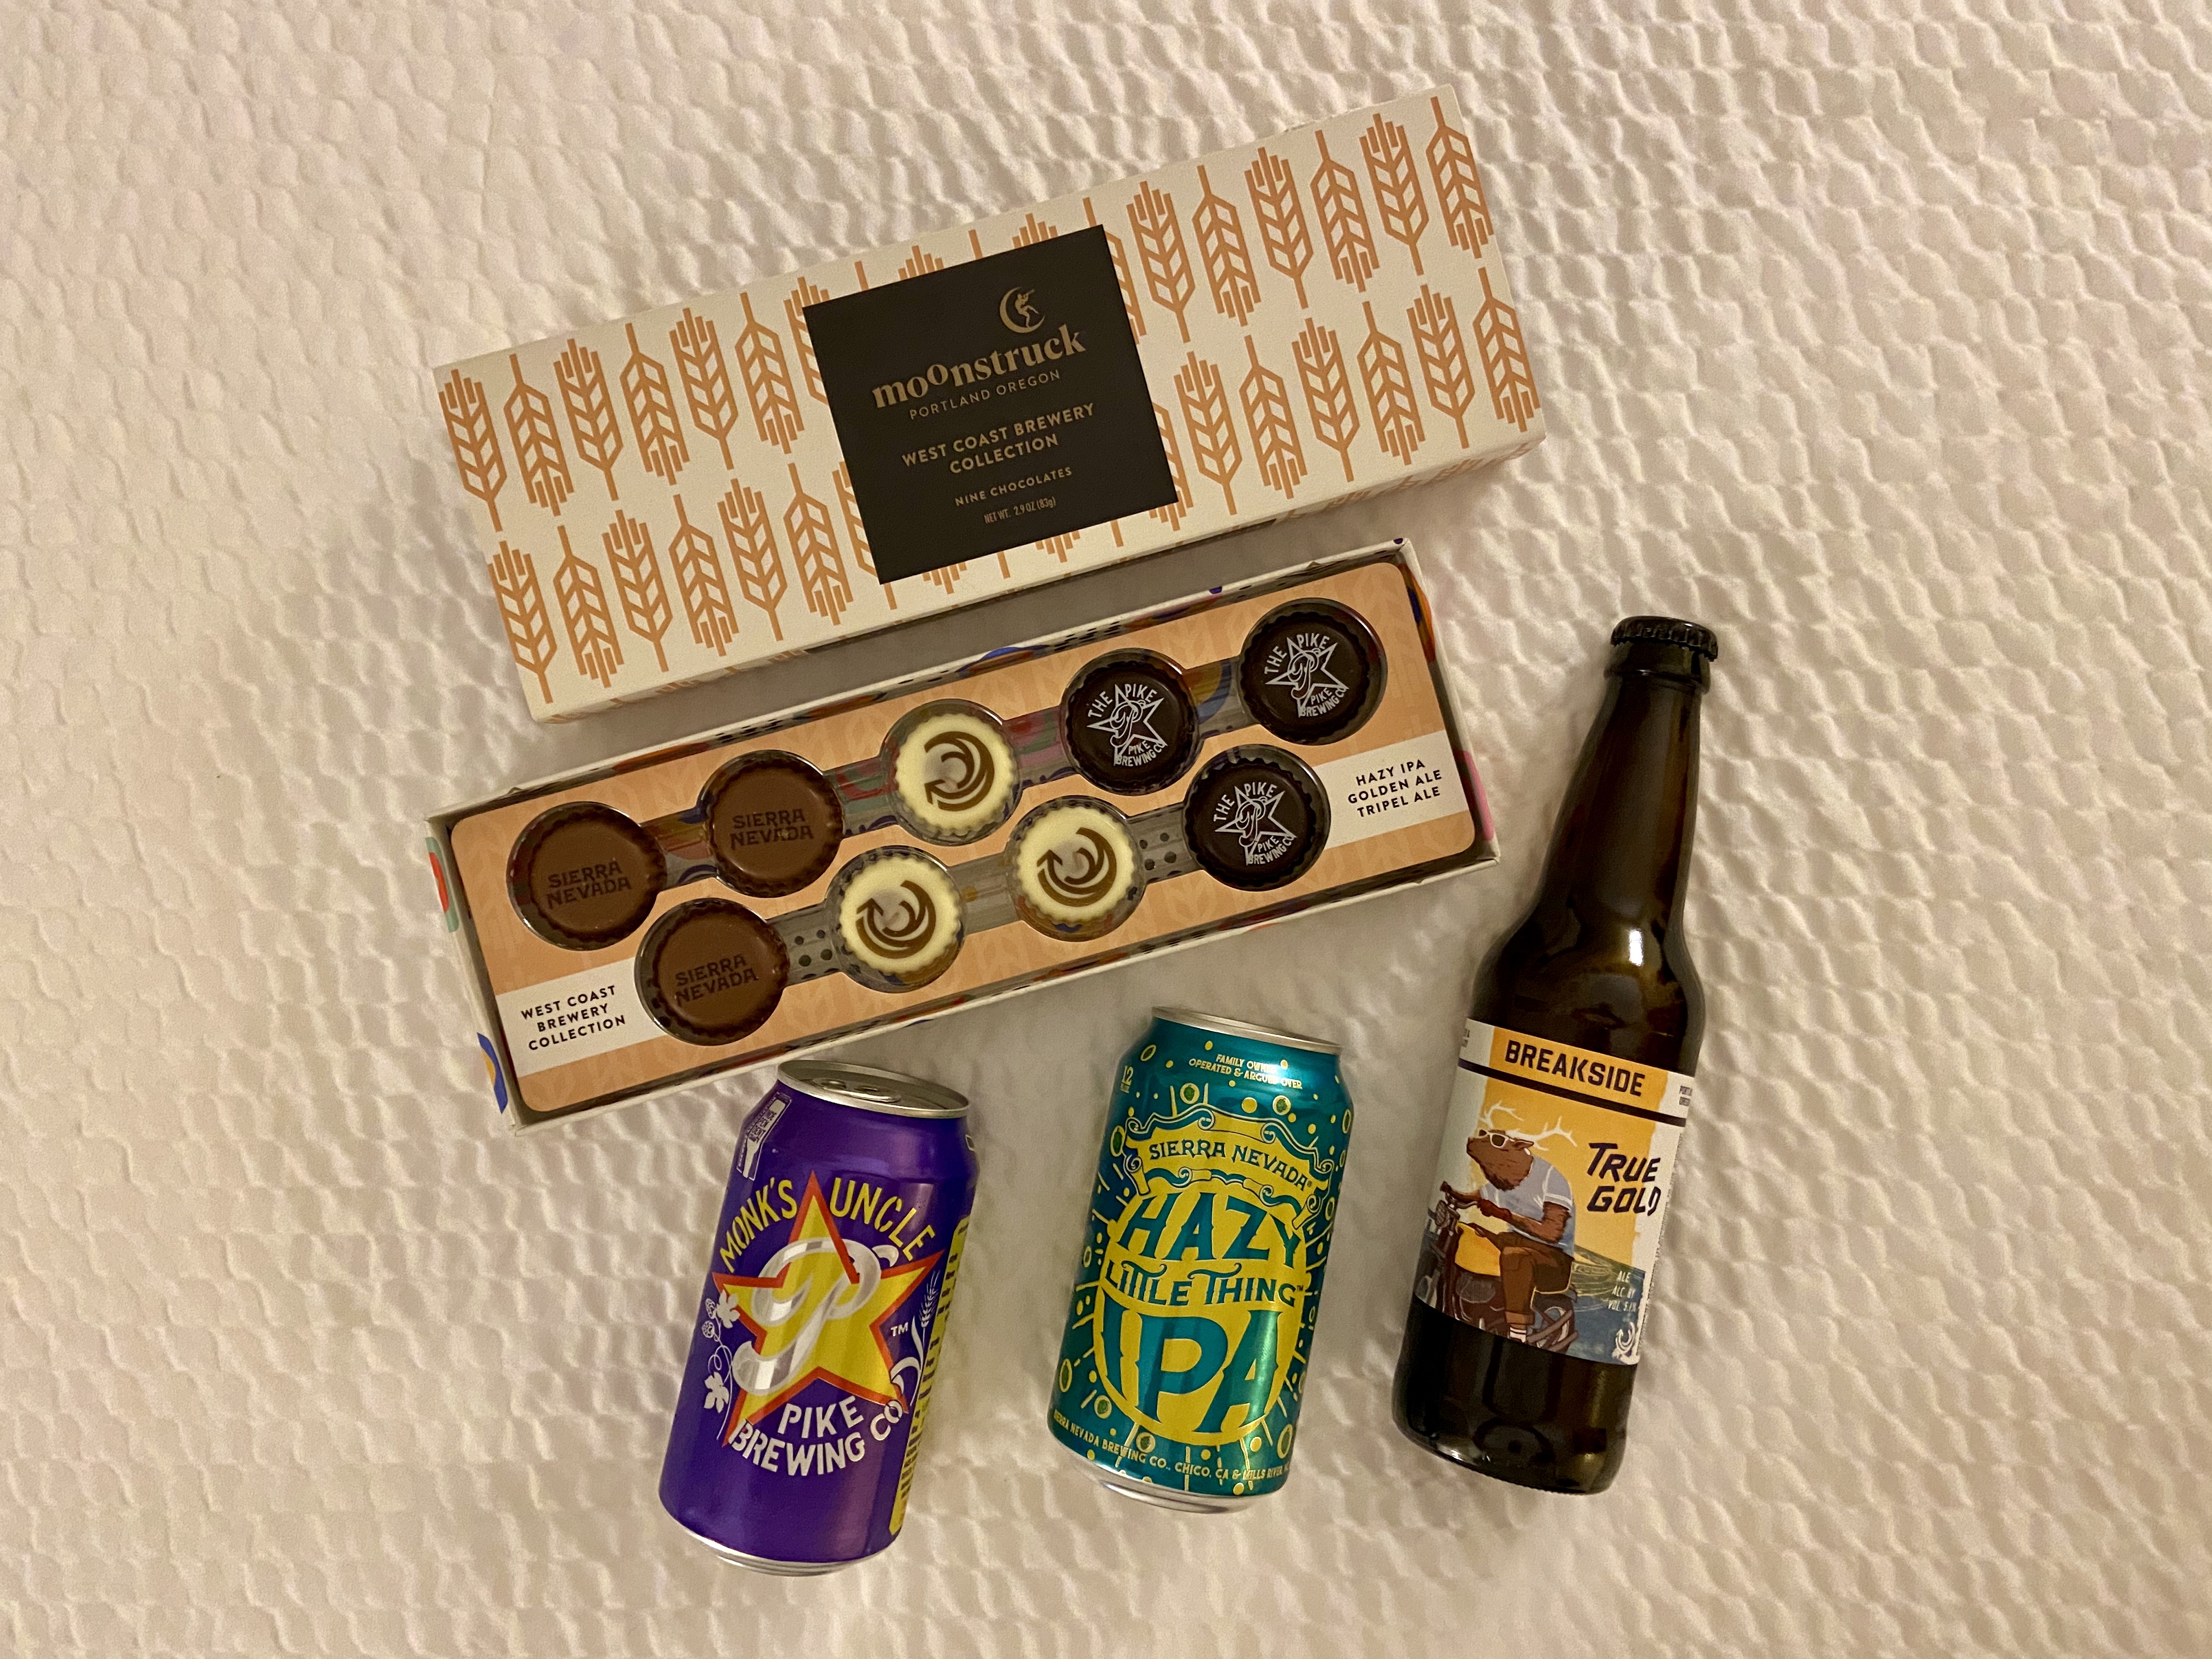 Moonstruck Chocolate West Coast Brewery Collection with Breakside Brewery’s True Gold Golden Ale, Pike Brewing’s Monk’s Uncle Tripel Ale and Sierra Nevada’s Hazy Little Thing IPA.